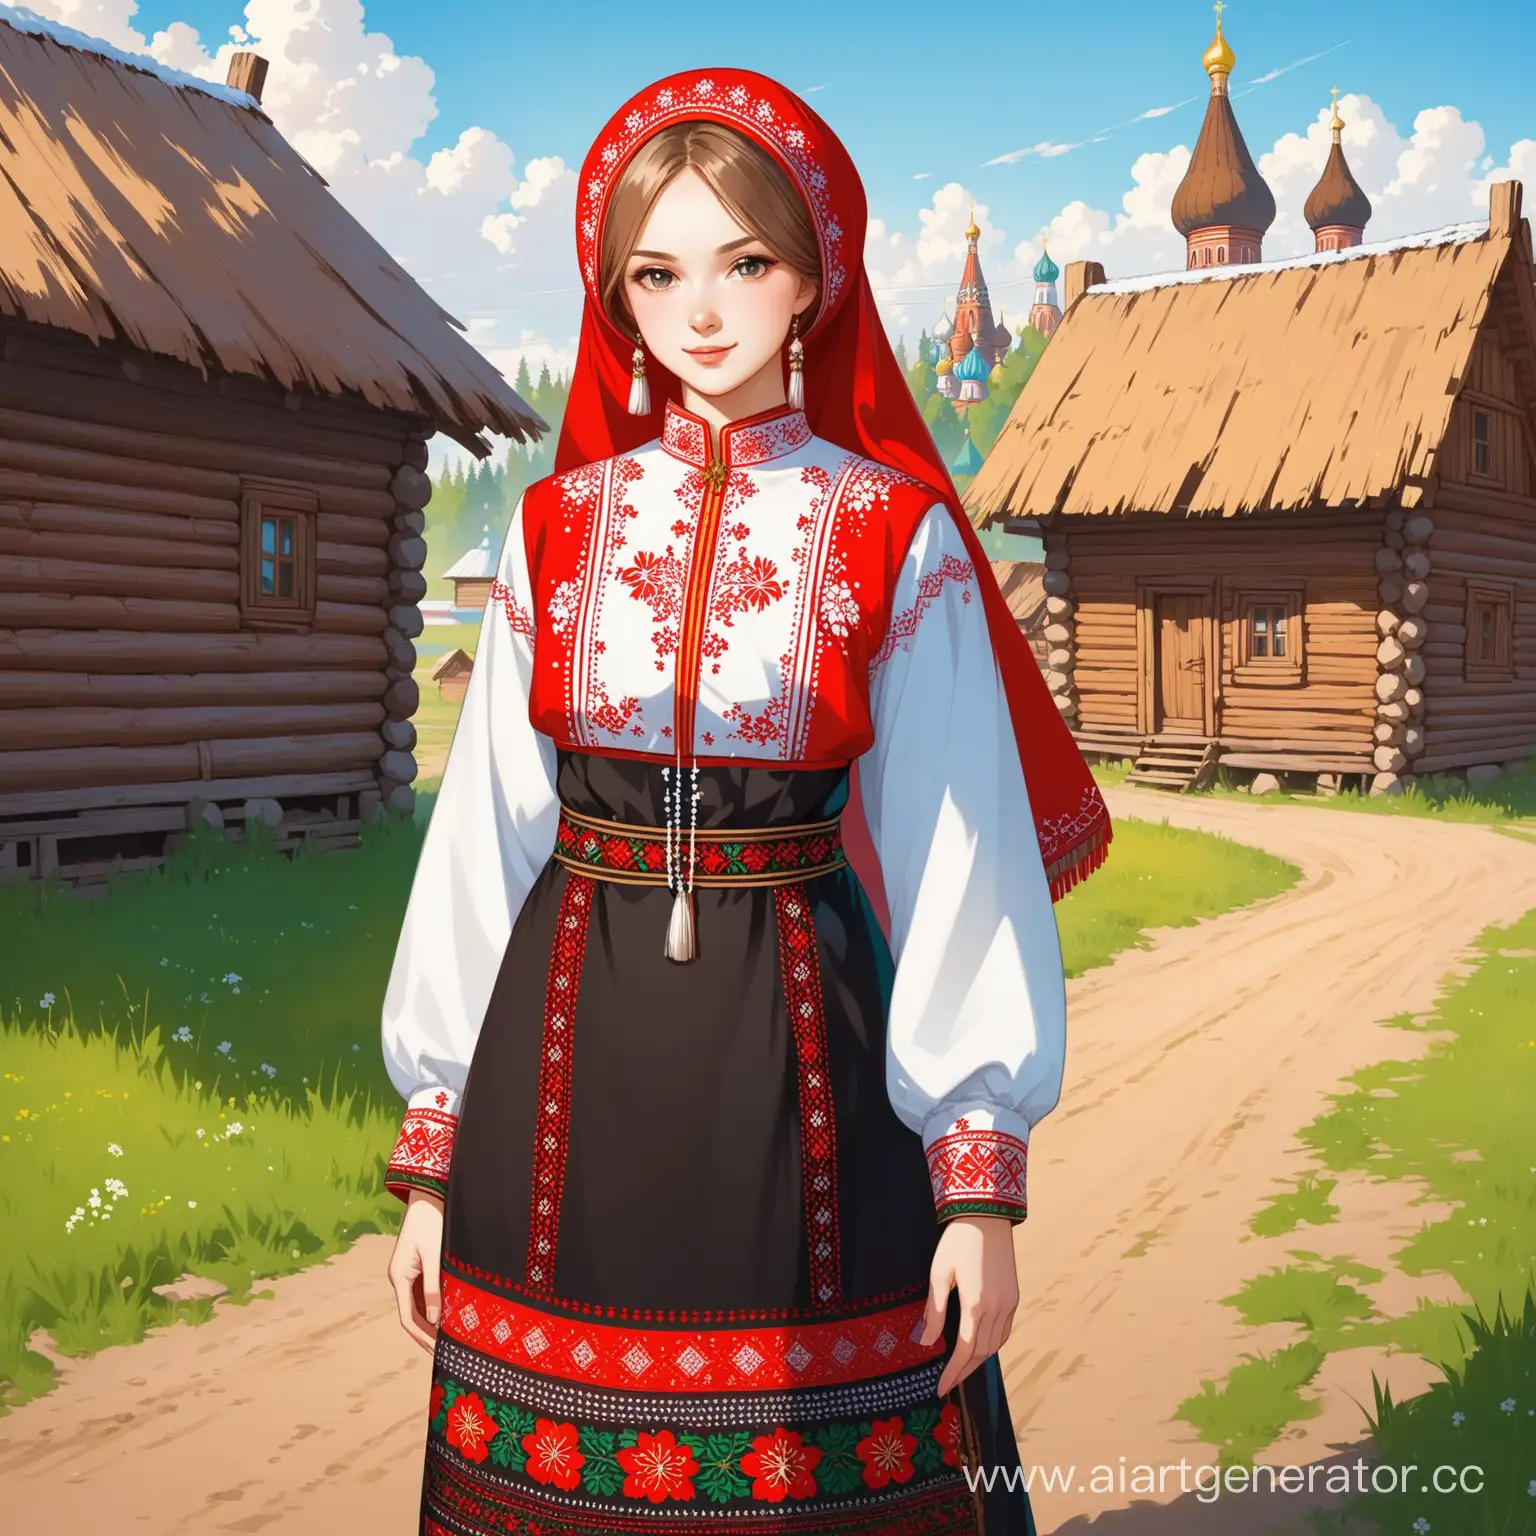 Traditional-Russian-Village-Clothing-Authentic-Attire-in-a-Rustic-Setting